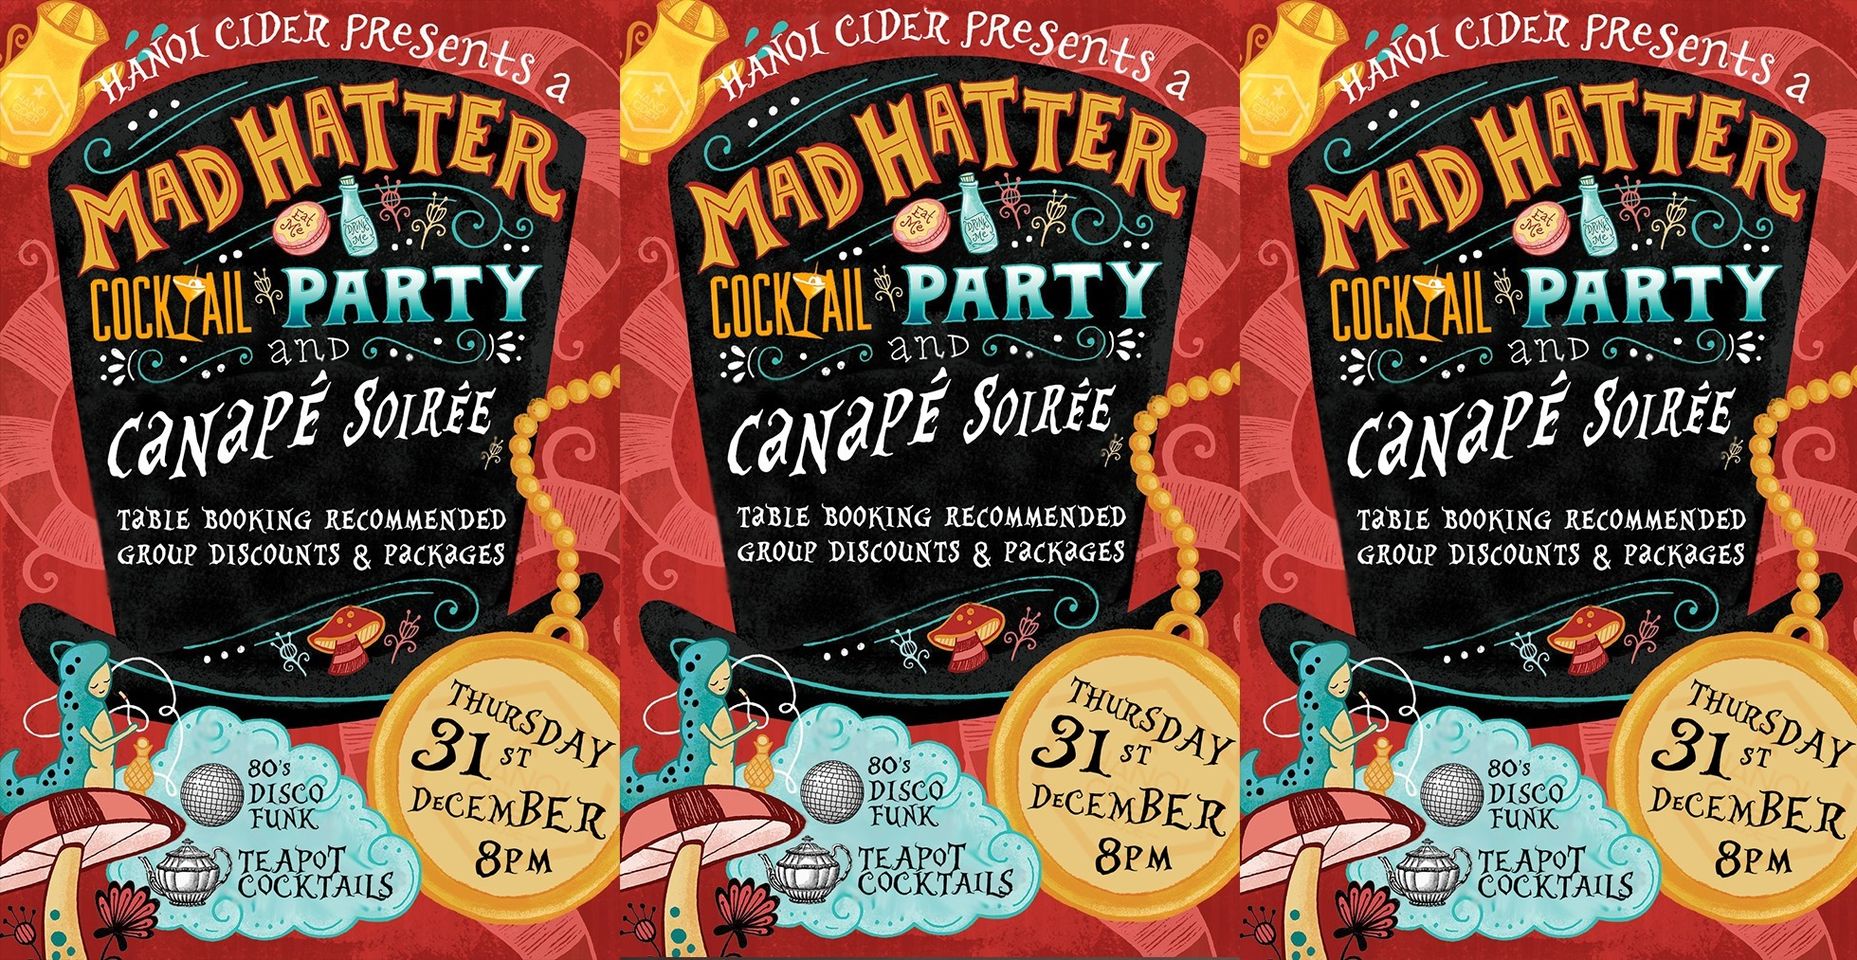 231 Cider House MadHatters NYE